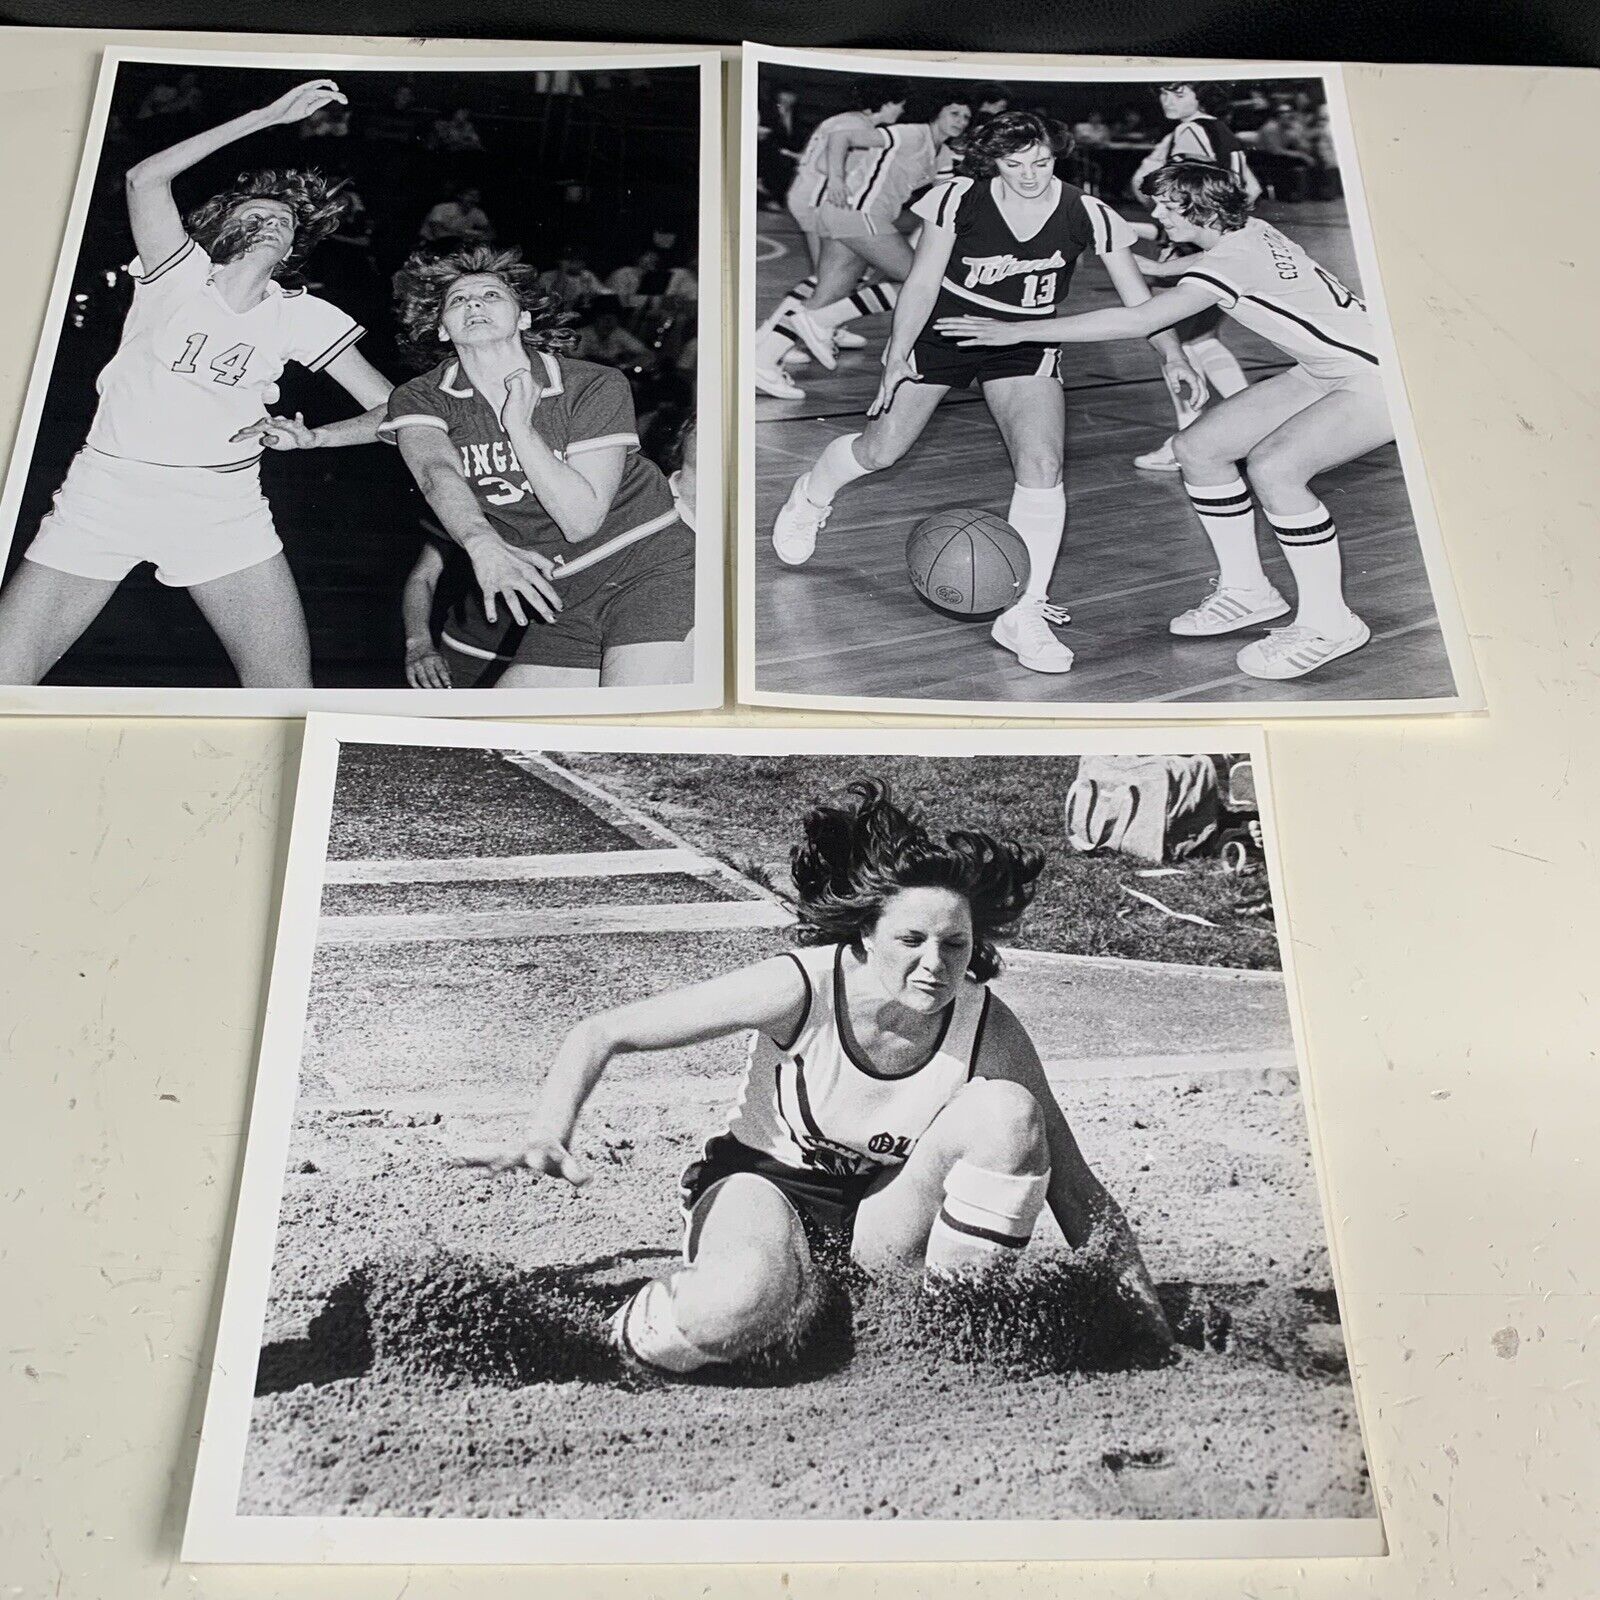 Vintage Women’s Sports Late 1970s Photos, Long Jump, Basketball Photography 8x10